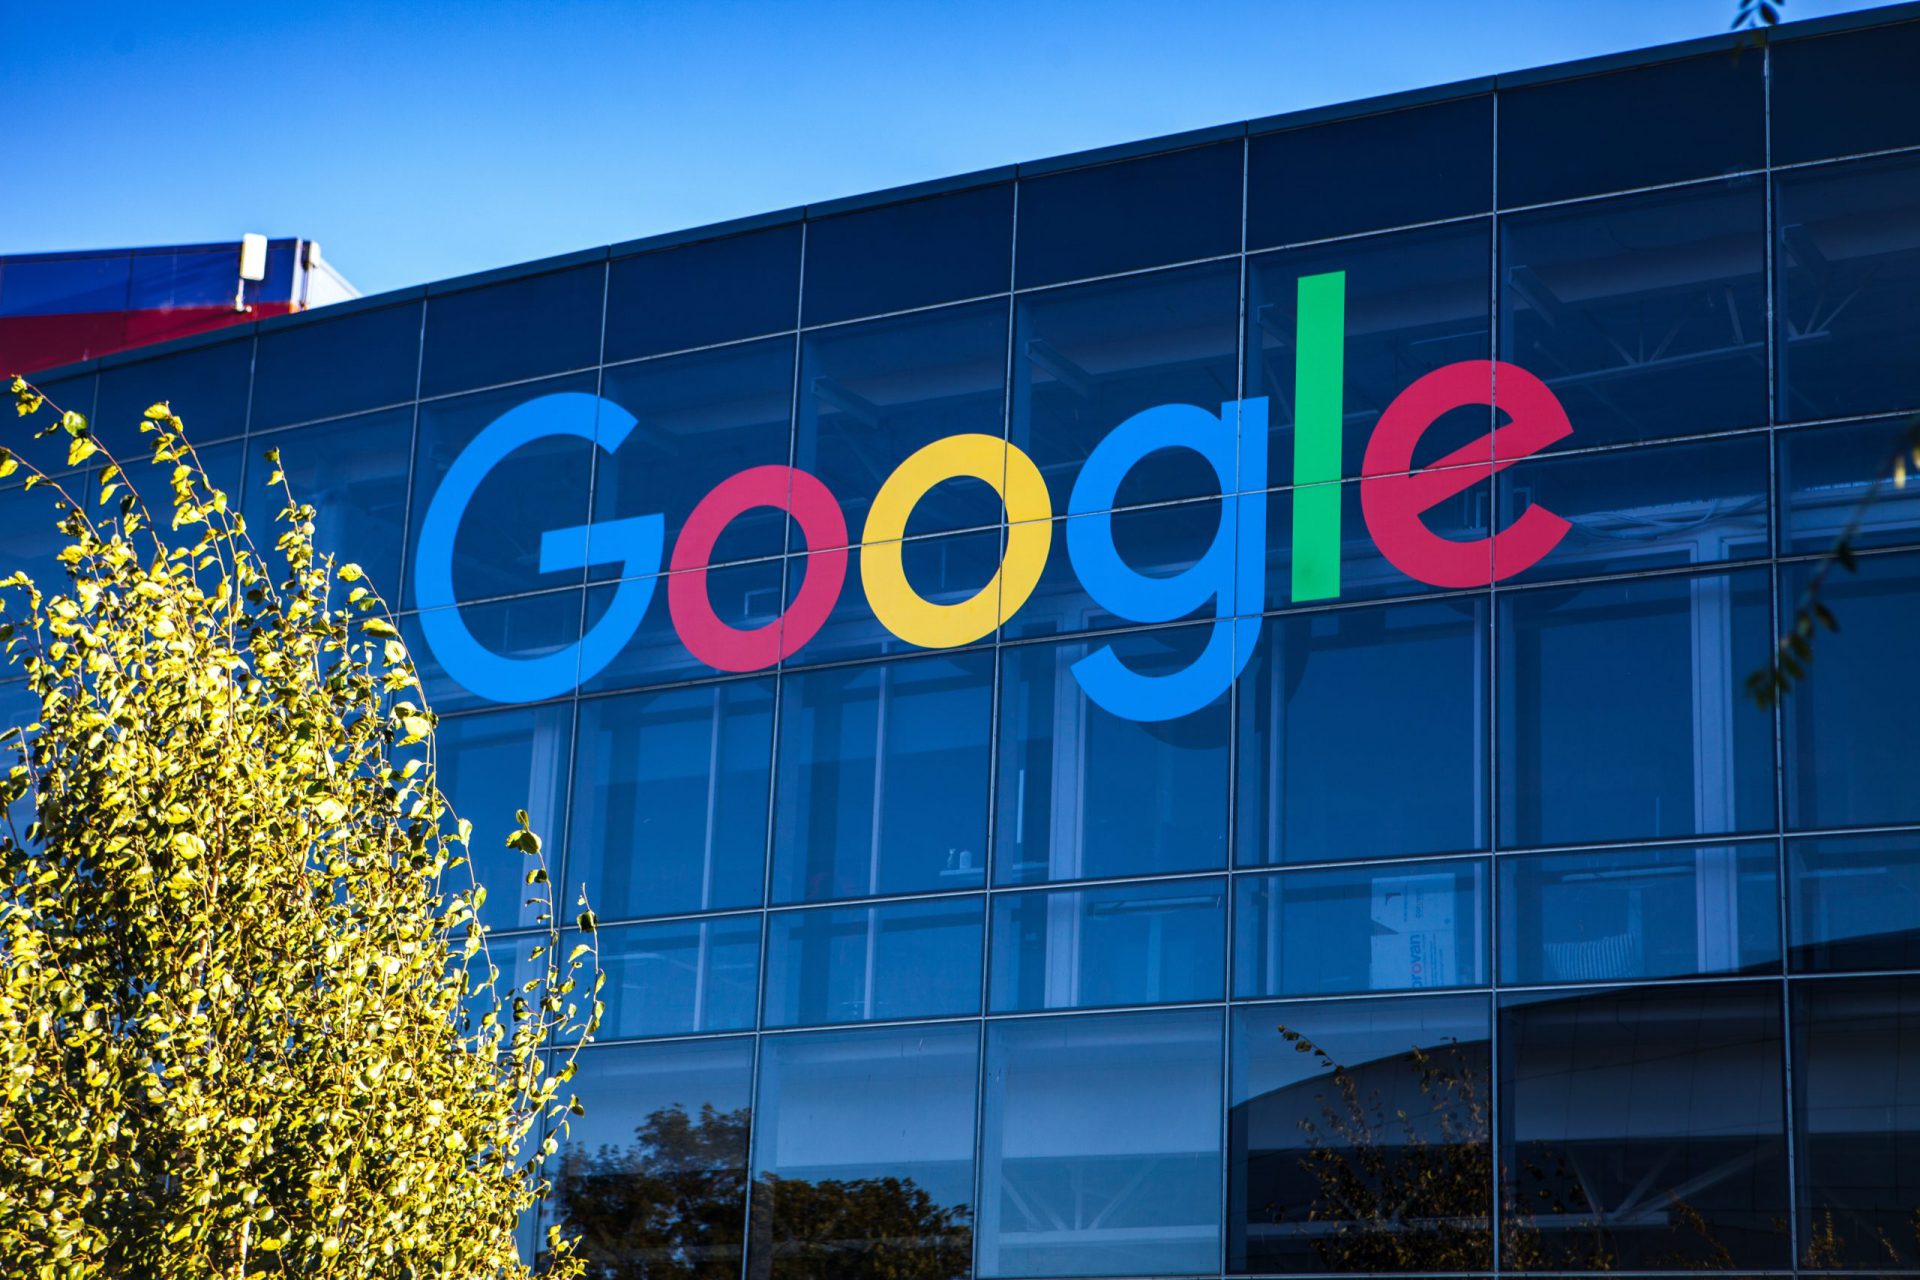 Google: Layoffs Hit Hundreds of ‘Core’ Employees